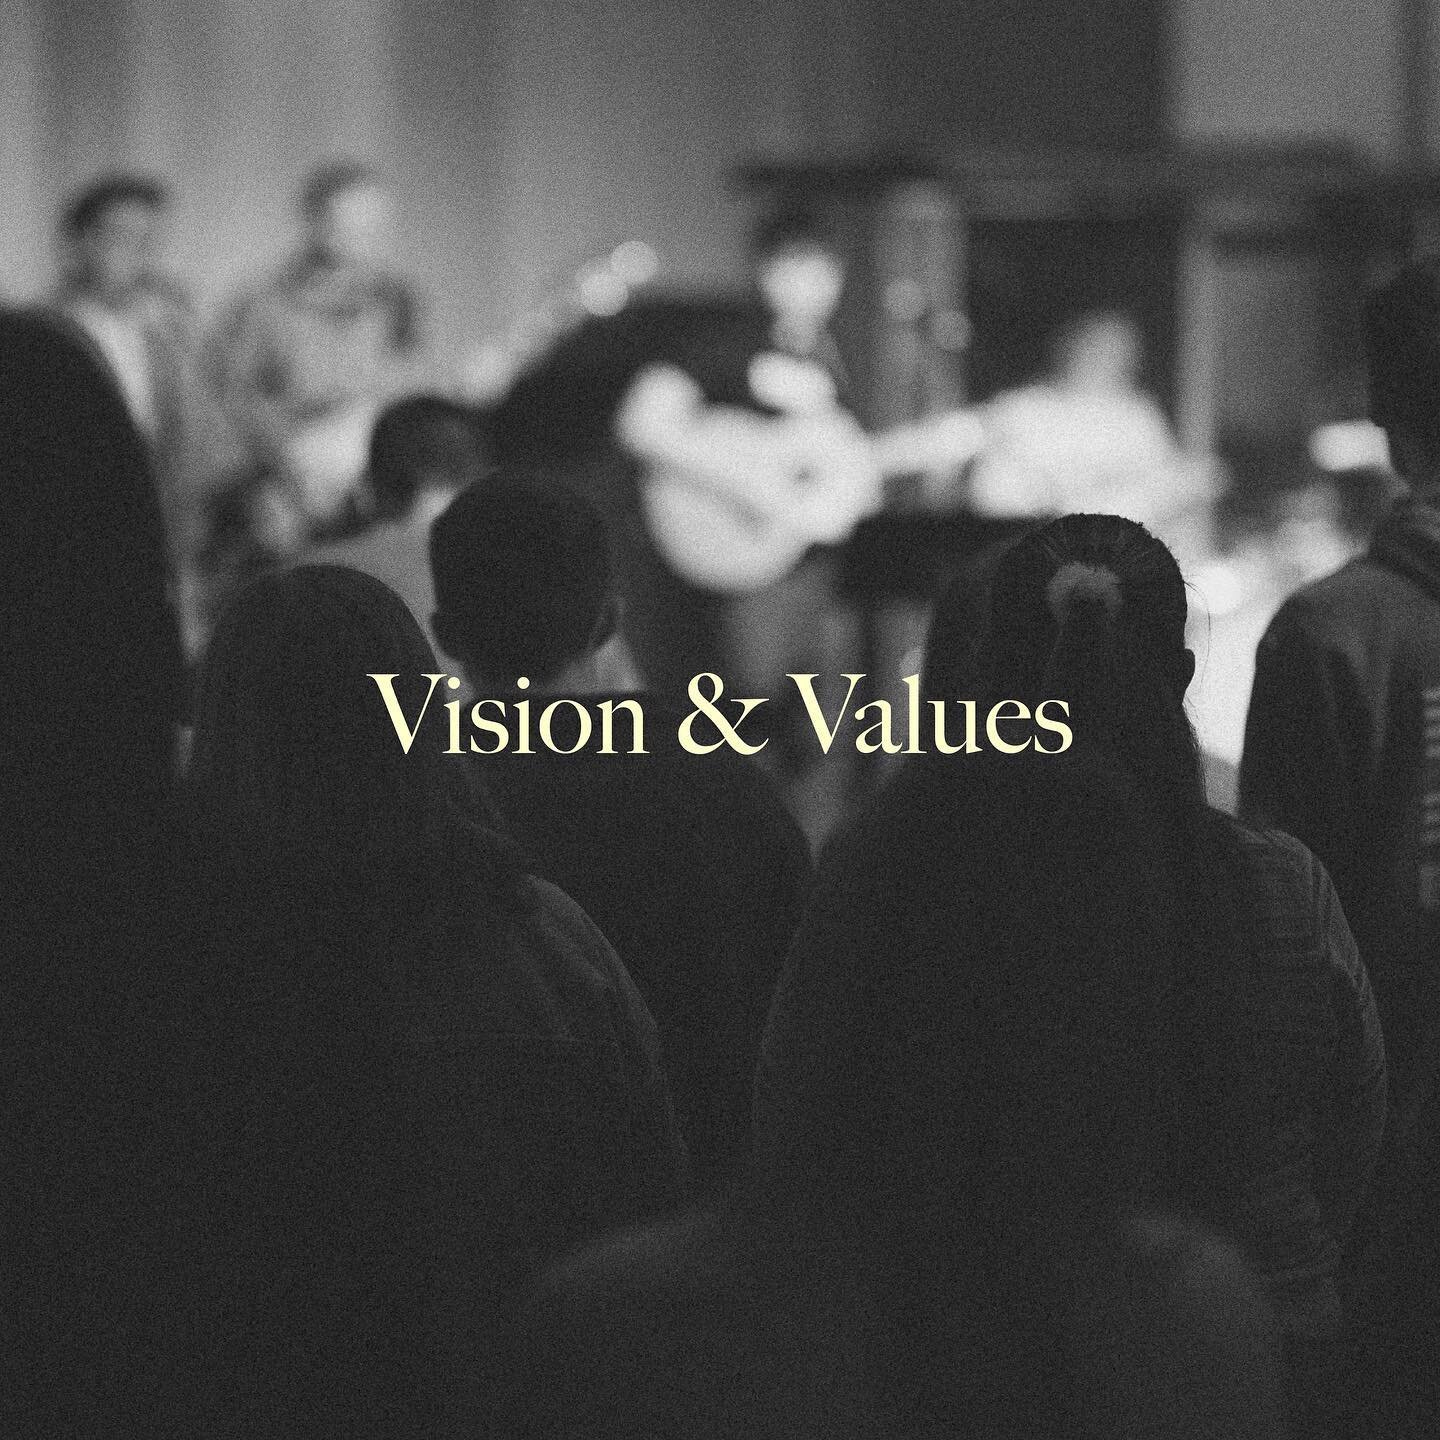 VISION &amp; VALUES 

What does a faithful Remnant of God&rsquo;s people do? They do not settle for the &lsquo;status quo&rsquo;. 

Young Adults, Faith &amp; Church - What&rsquo;s the story? In the past 20 years in our nation, Young Adults have incre